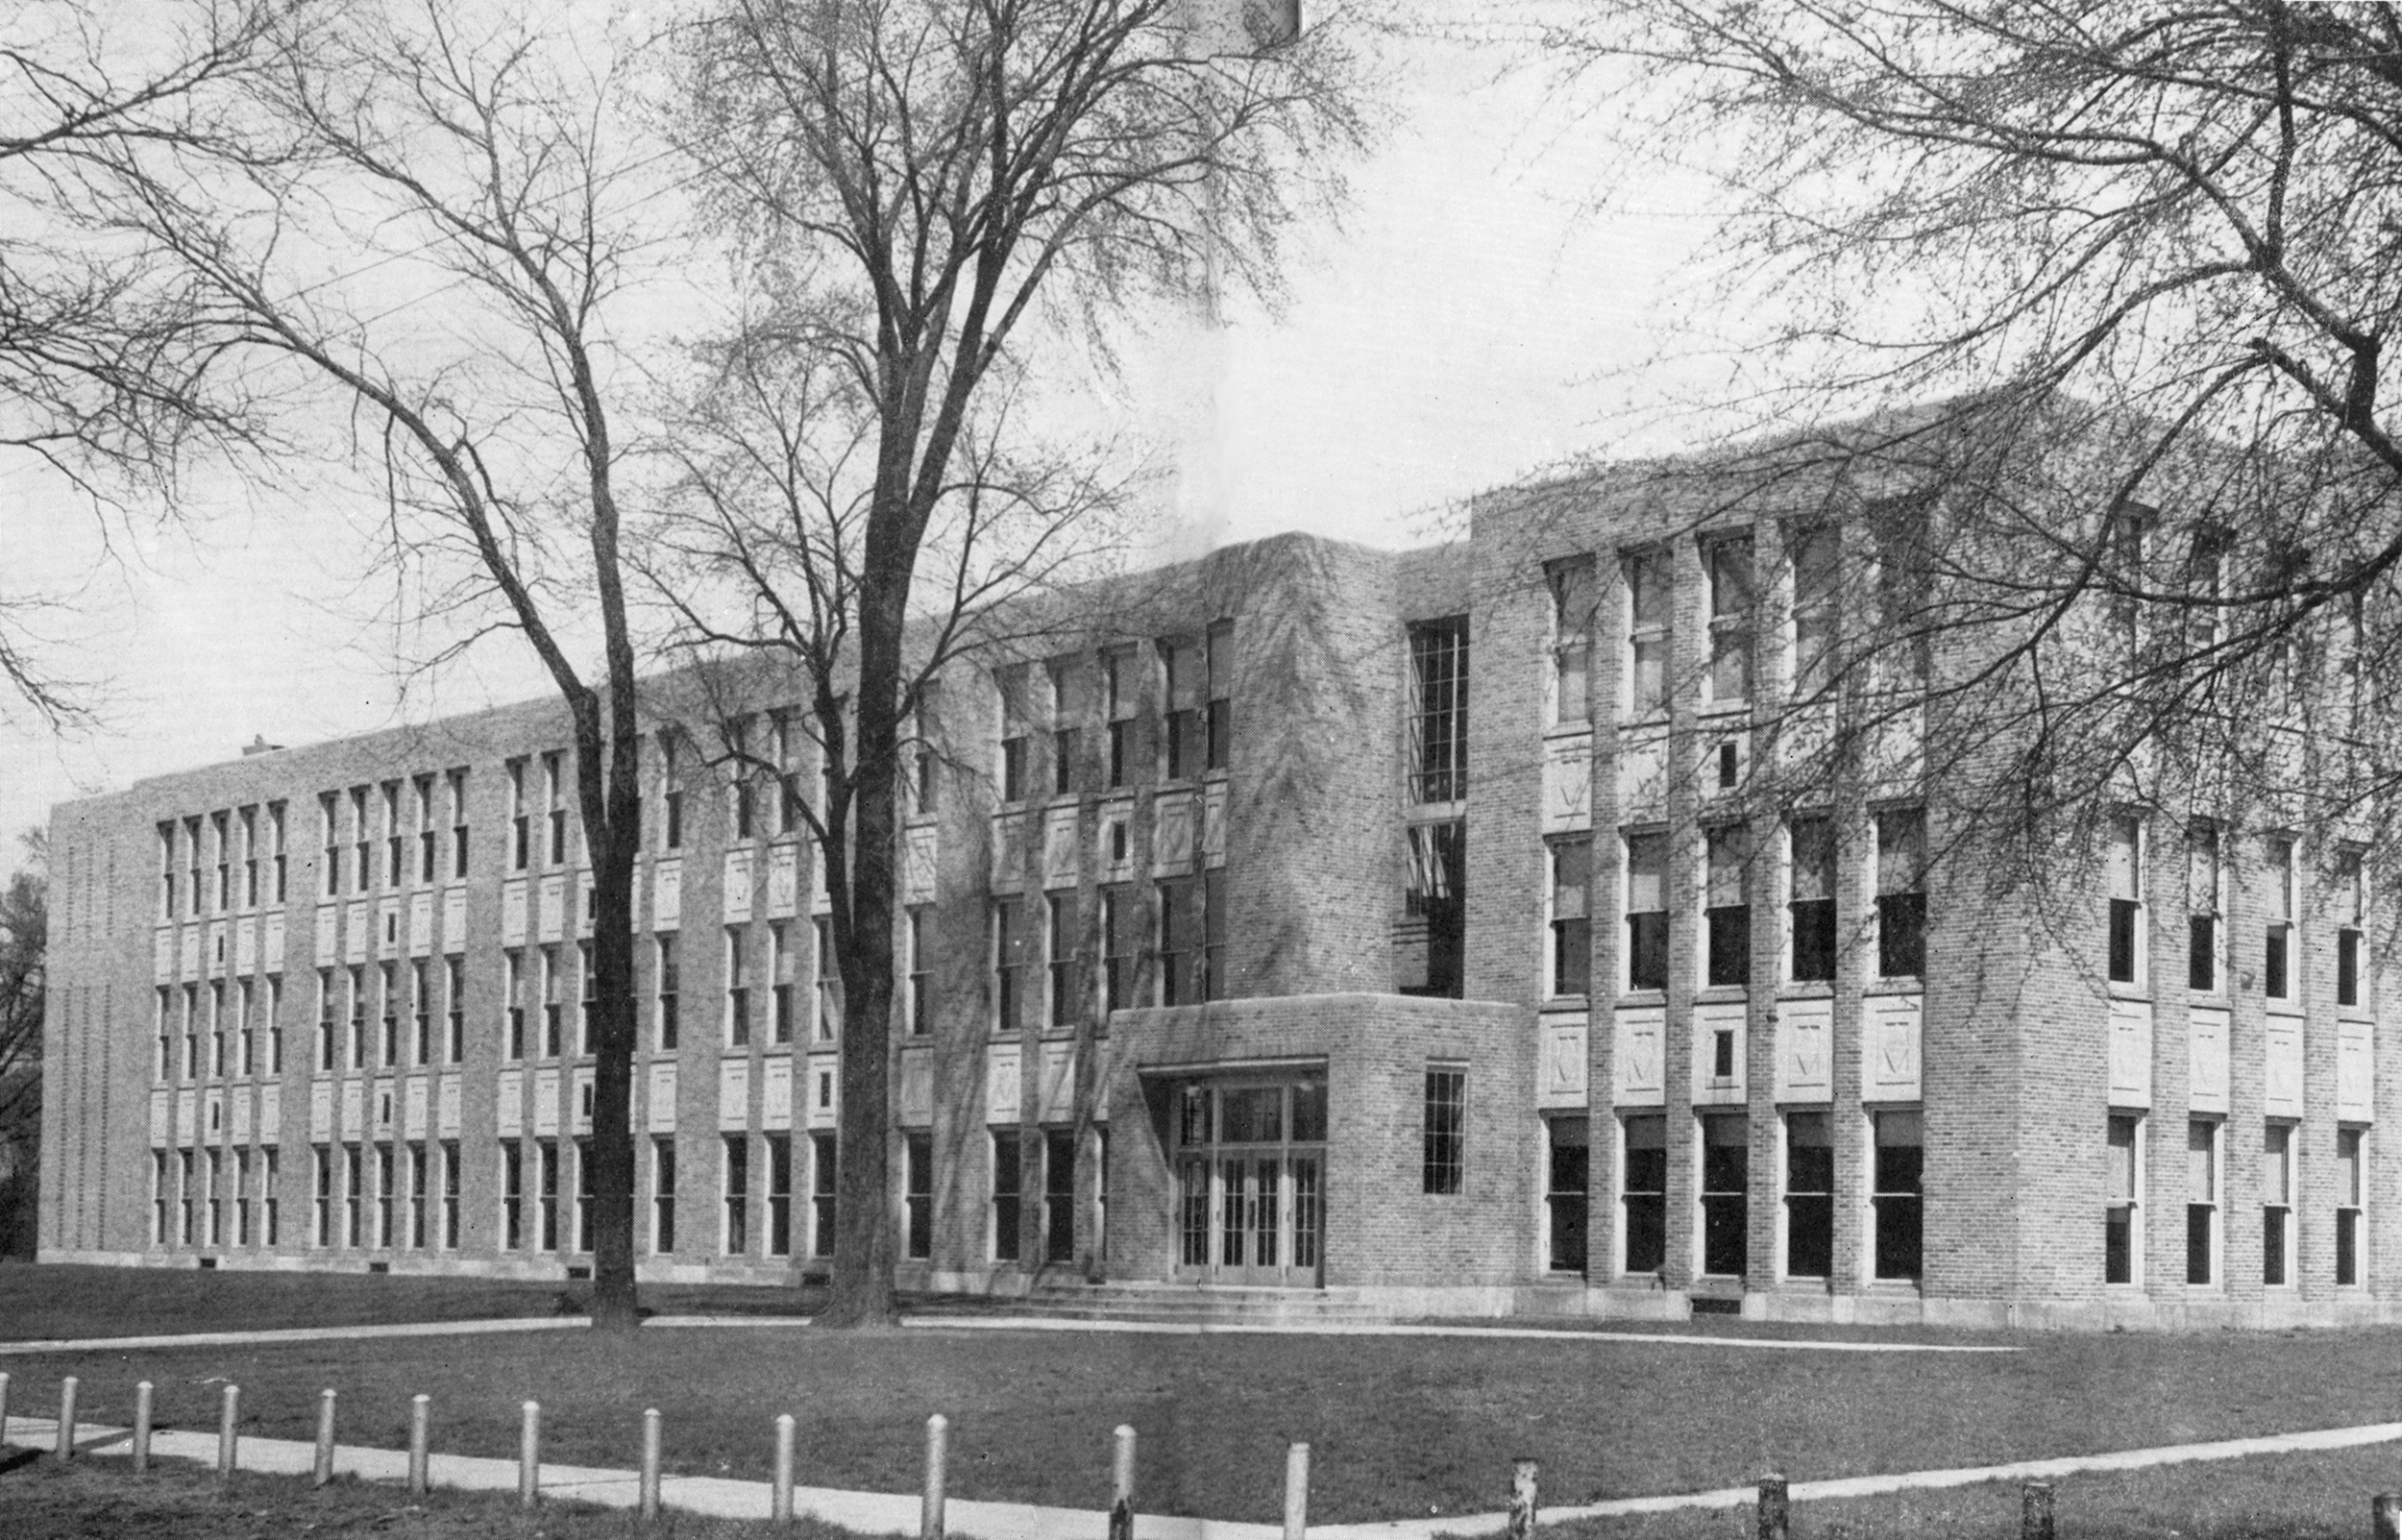 Two stories were completed on the west wing in 1935